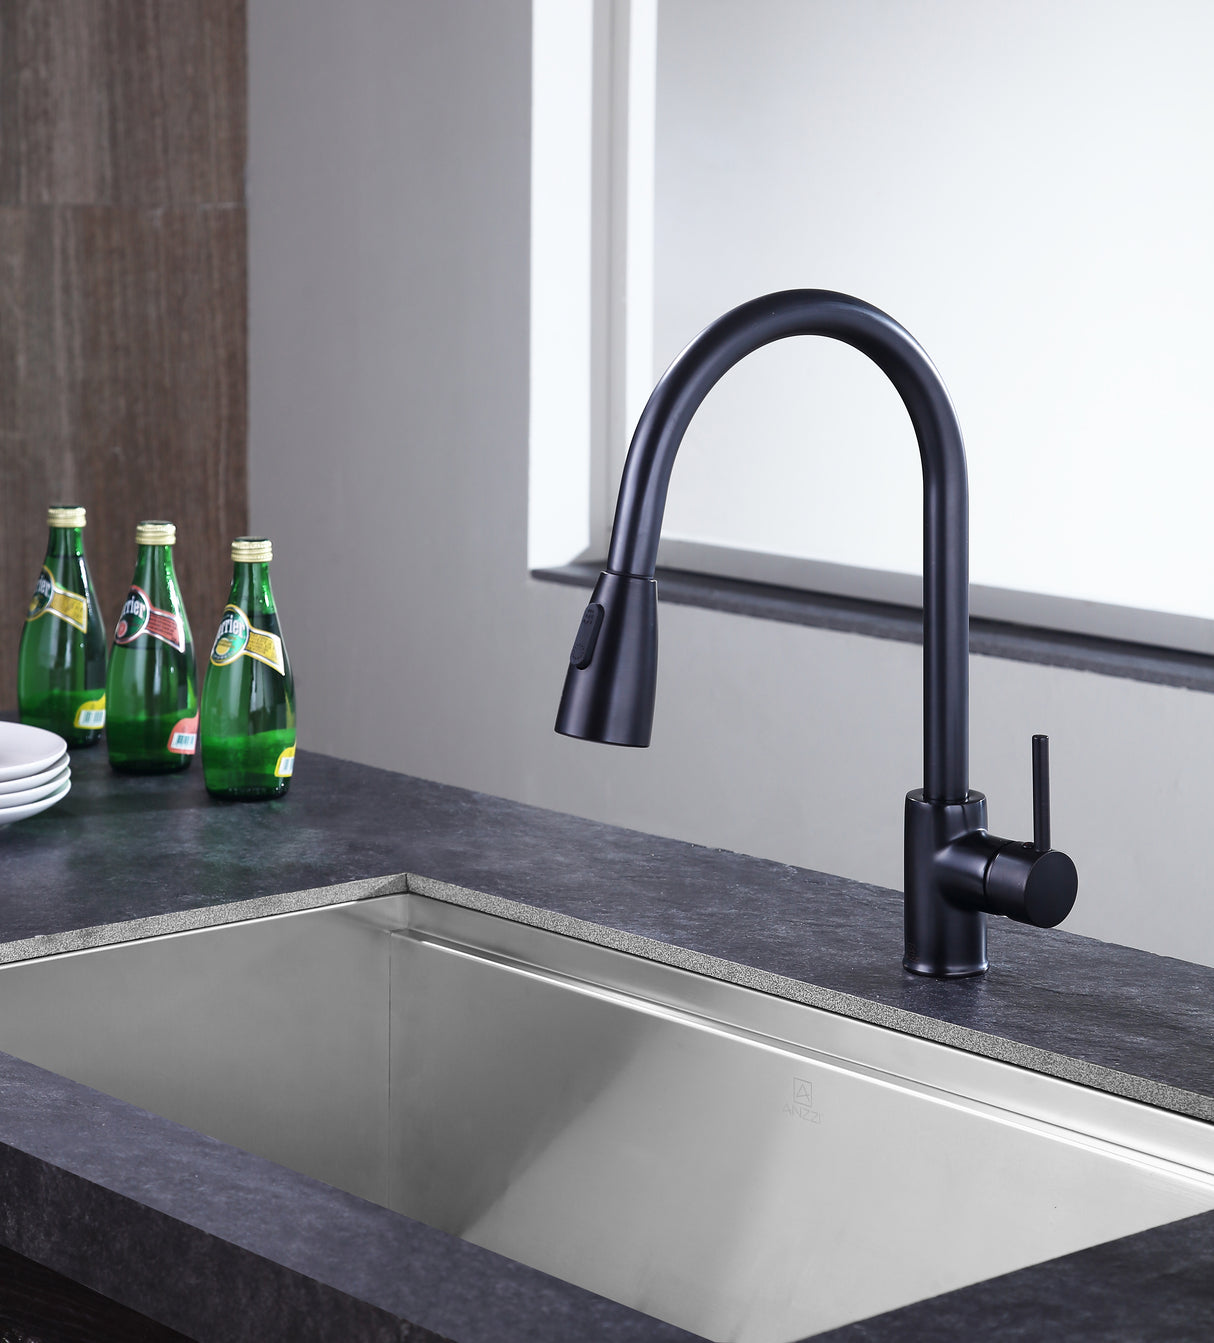 ANZZI KF-AZ212ORB Sire Single-Handle Pull-Out Sprayer Kitchen Faucet in Oil Rubbed Bronze